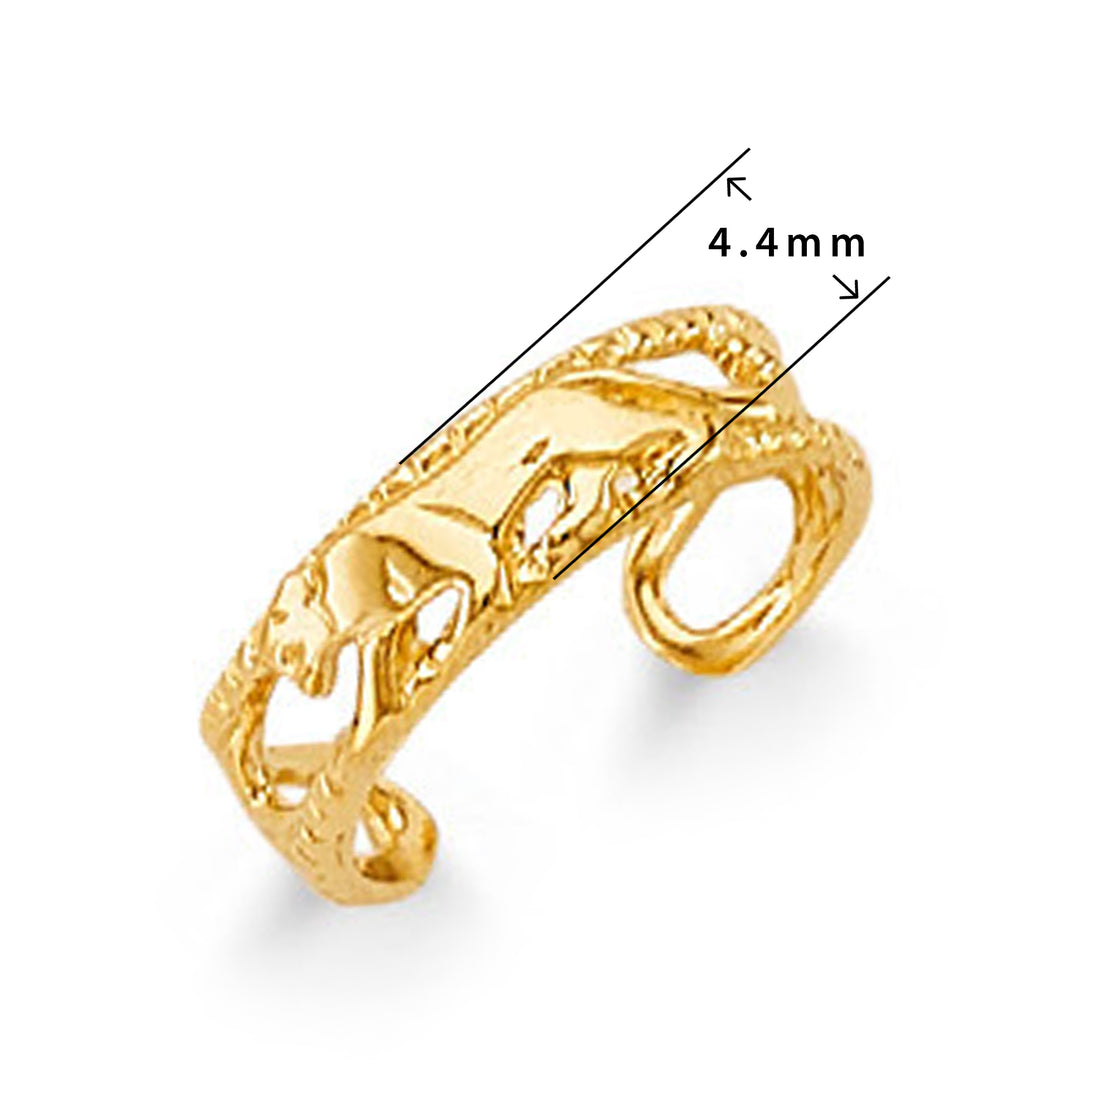 Stylish Filigree Fashionable Ring in Solid Gold with Measurement